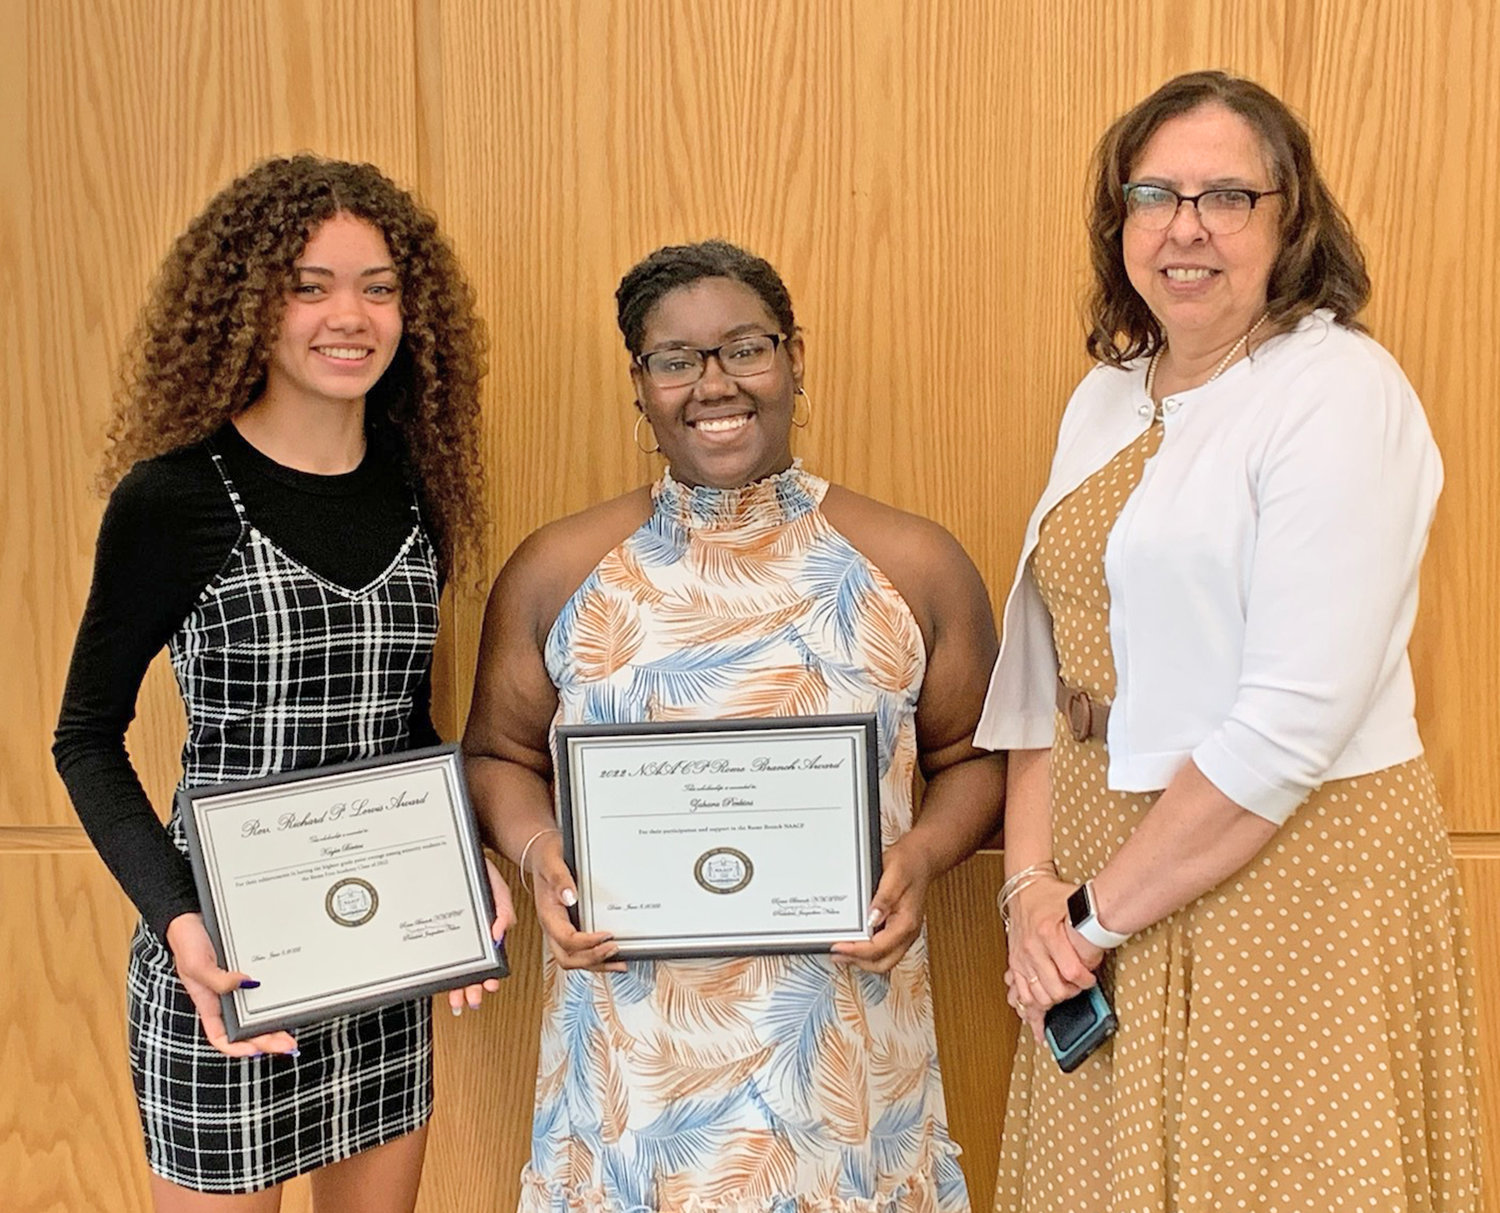 Kaylee Bertini, left, receives the Rev. Richard P. Lewis Award and $500, while Zahara Perkins, center, receives the 2022 Rome NAACP Award and $500. The graduating seniors are shown with Jacqueline Nelson, president of the Rome Branch NAACP and Western Region education chair.